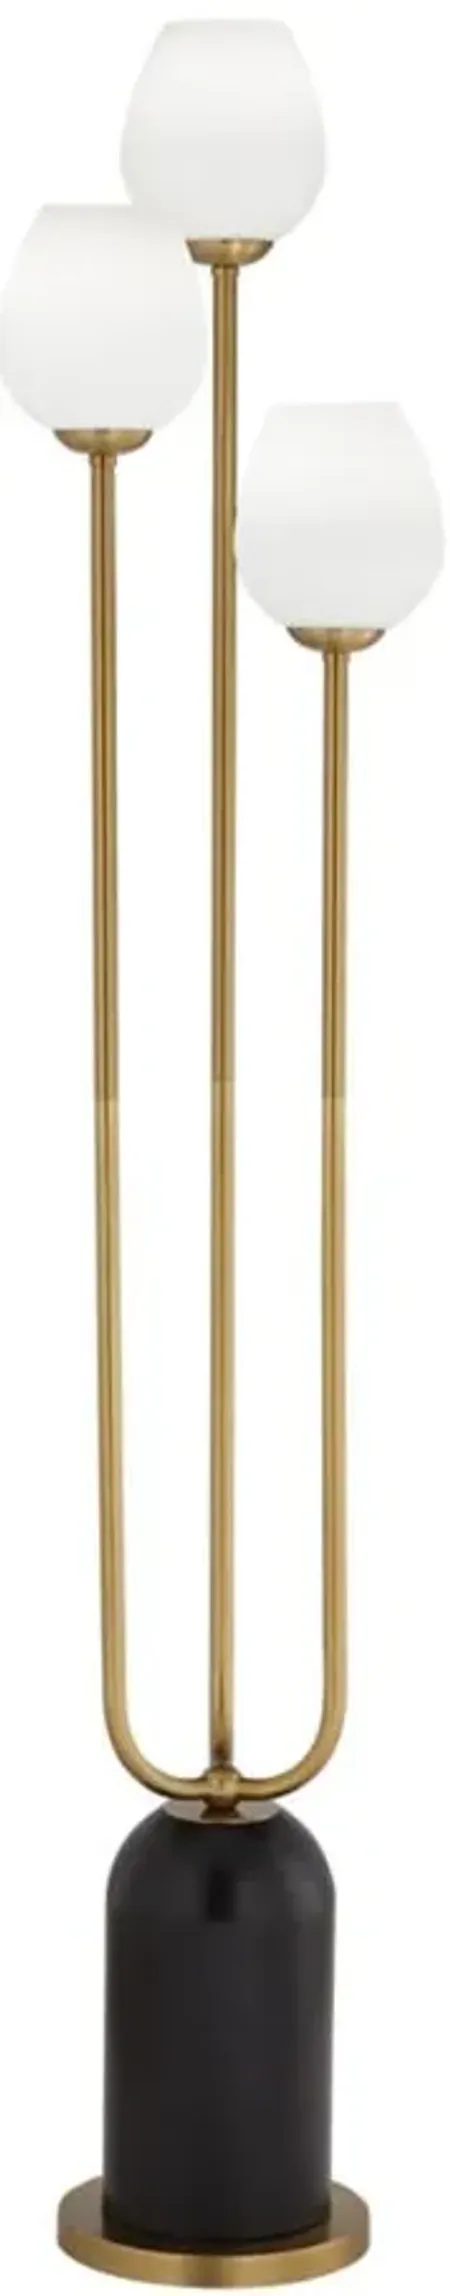 Grayson Floor Lamp in Black;Gold by Pacific Coast